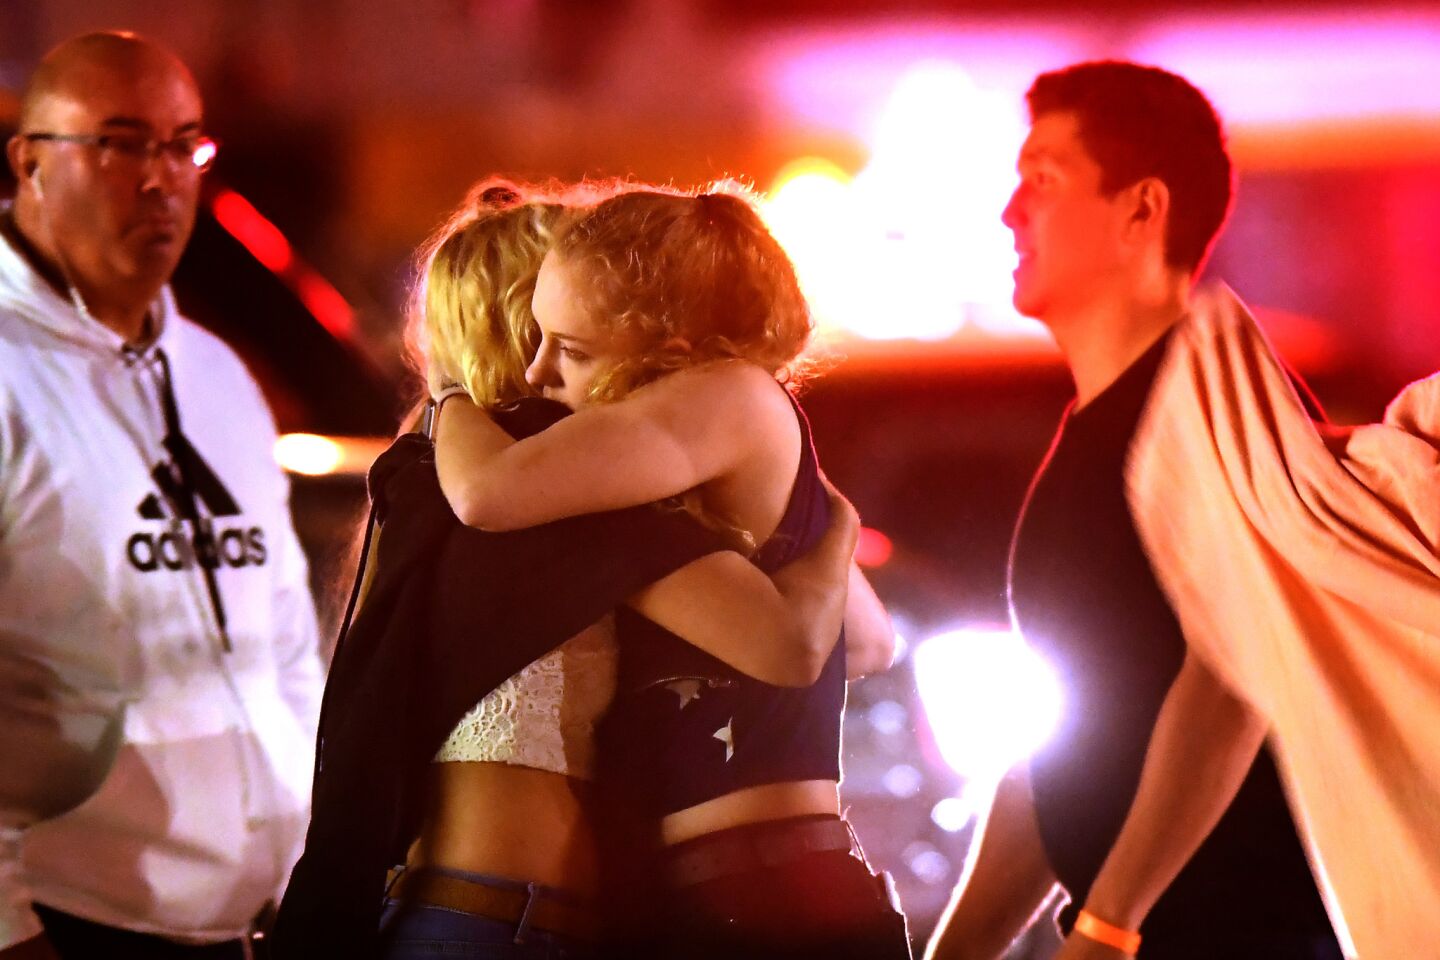 People comfort each other after a mass shooting at the Borderline Bar & Grill in Thousand Oaks on Nov. 7, 2018.